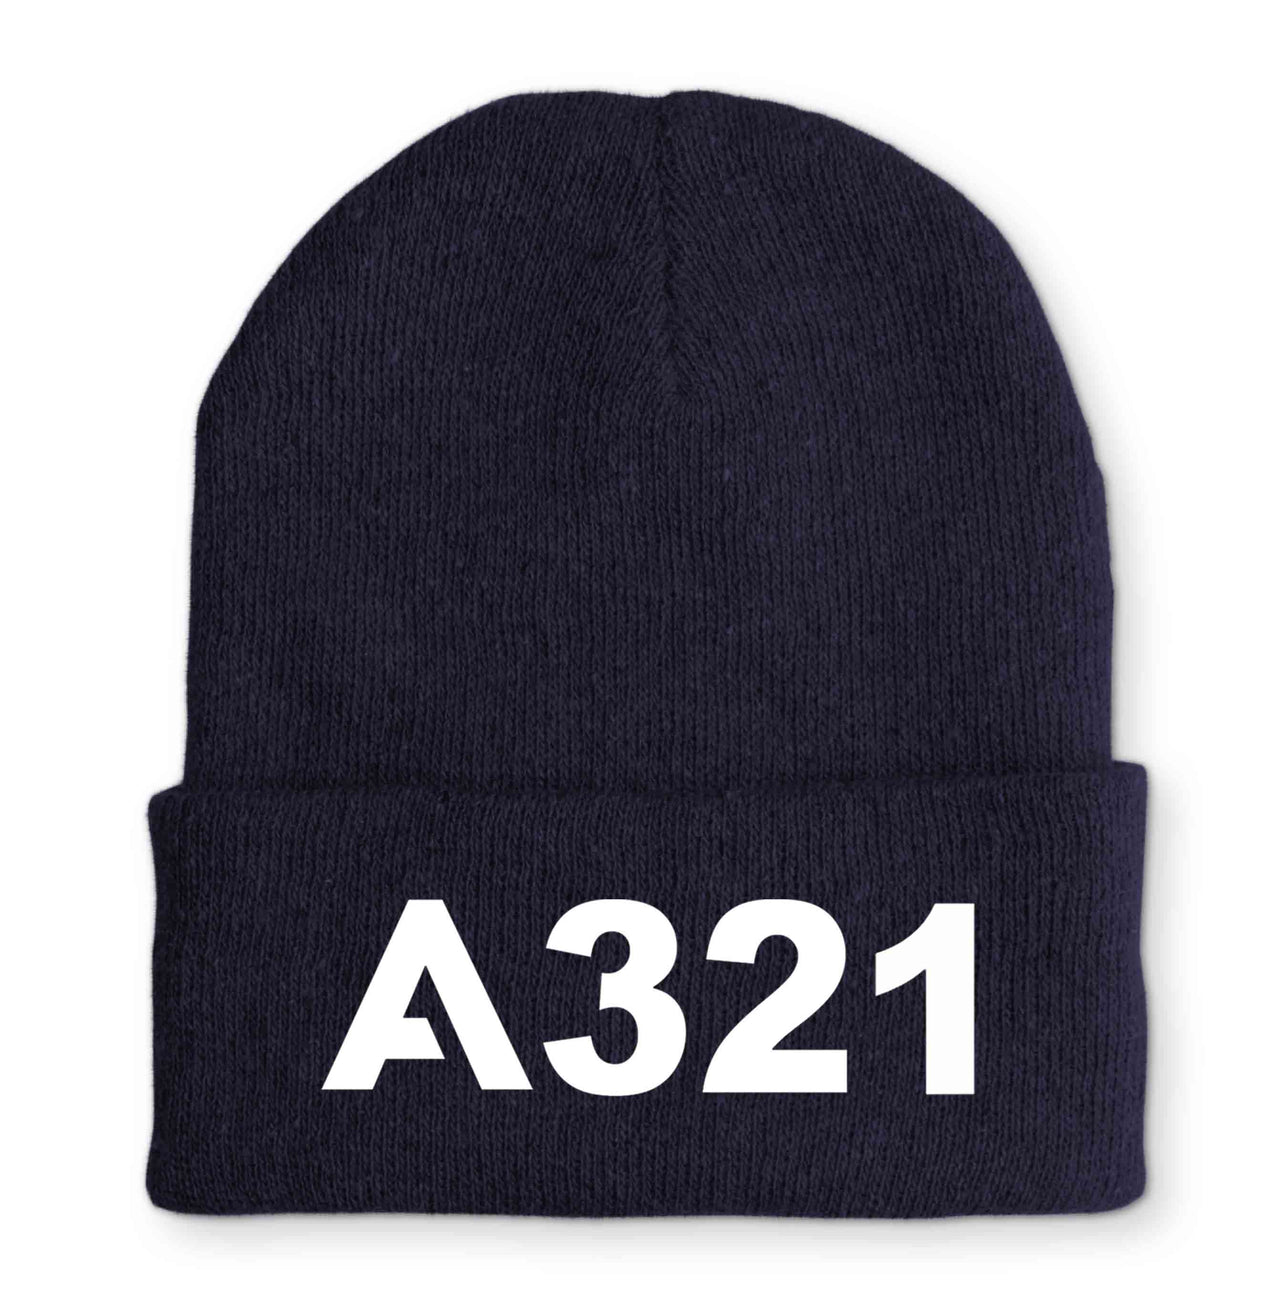 A321 Flat Text Embroidered Beanies